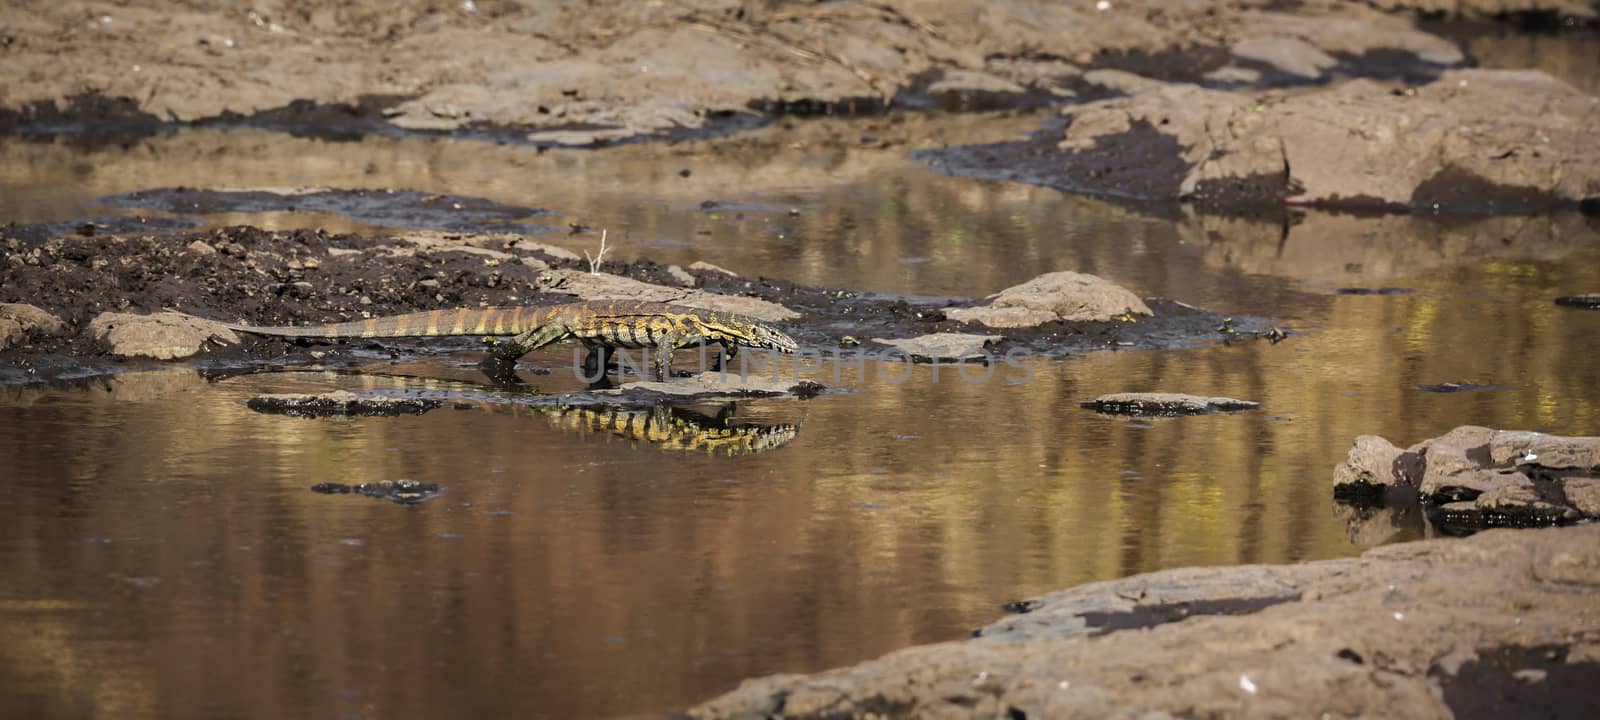 Nile monitor in Kruger National park, South Africa by PACOCOMO